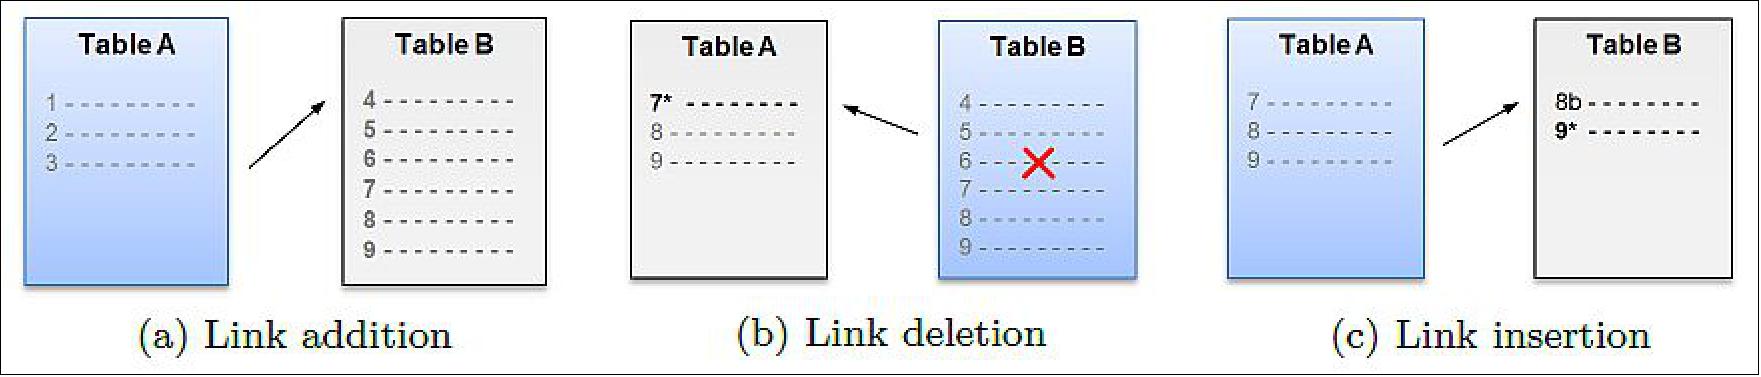 Figure 42: Ka-band table management: for each operation, the currently active table (in blue) must be switched (image credit: DLR)